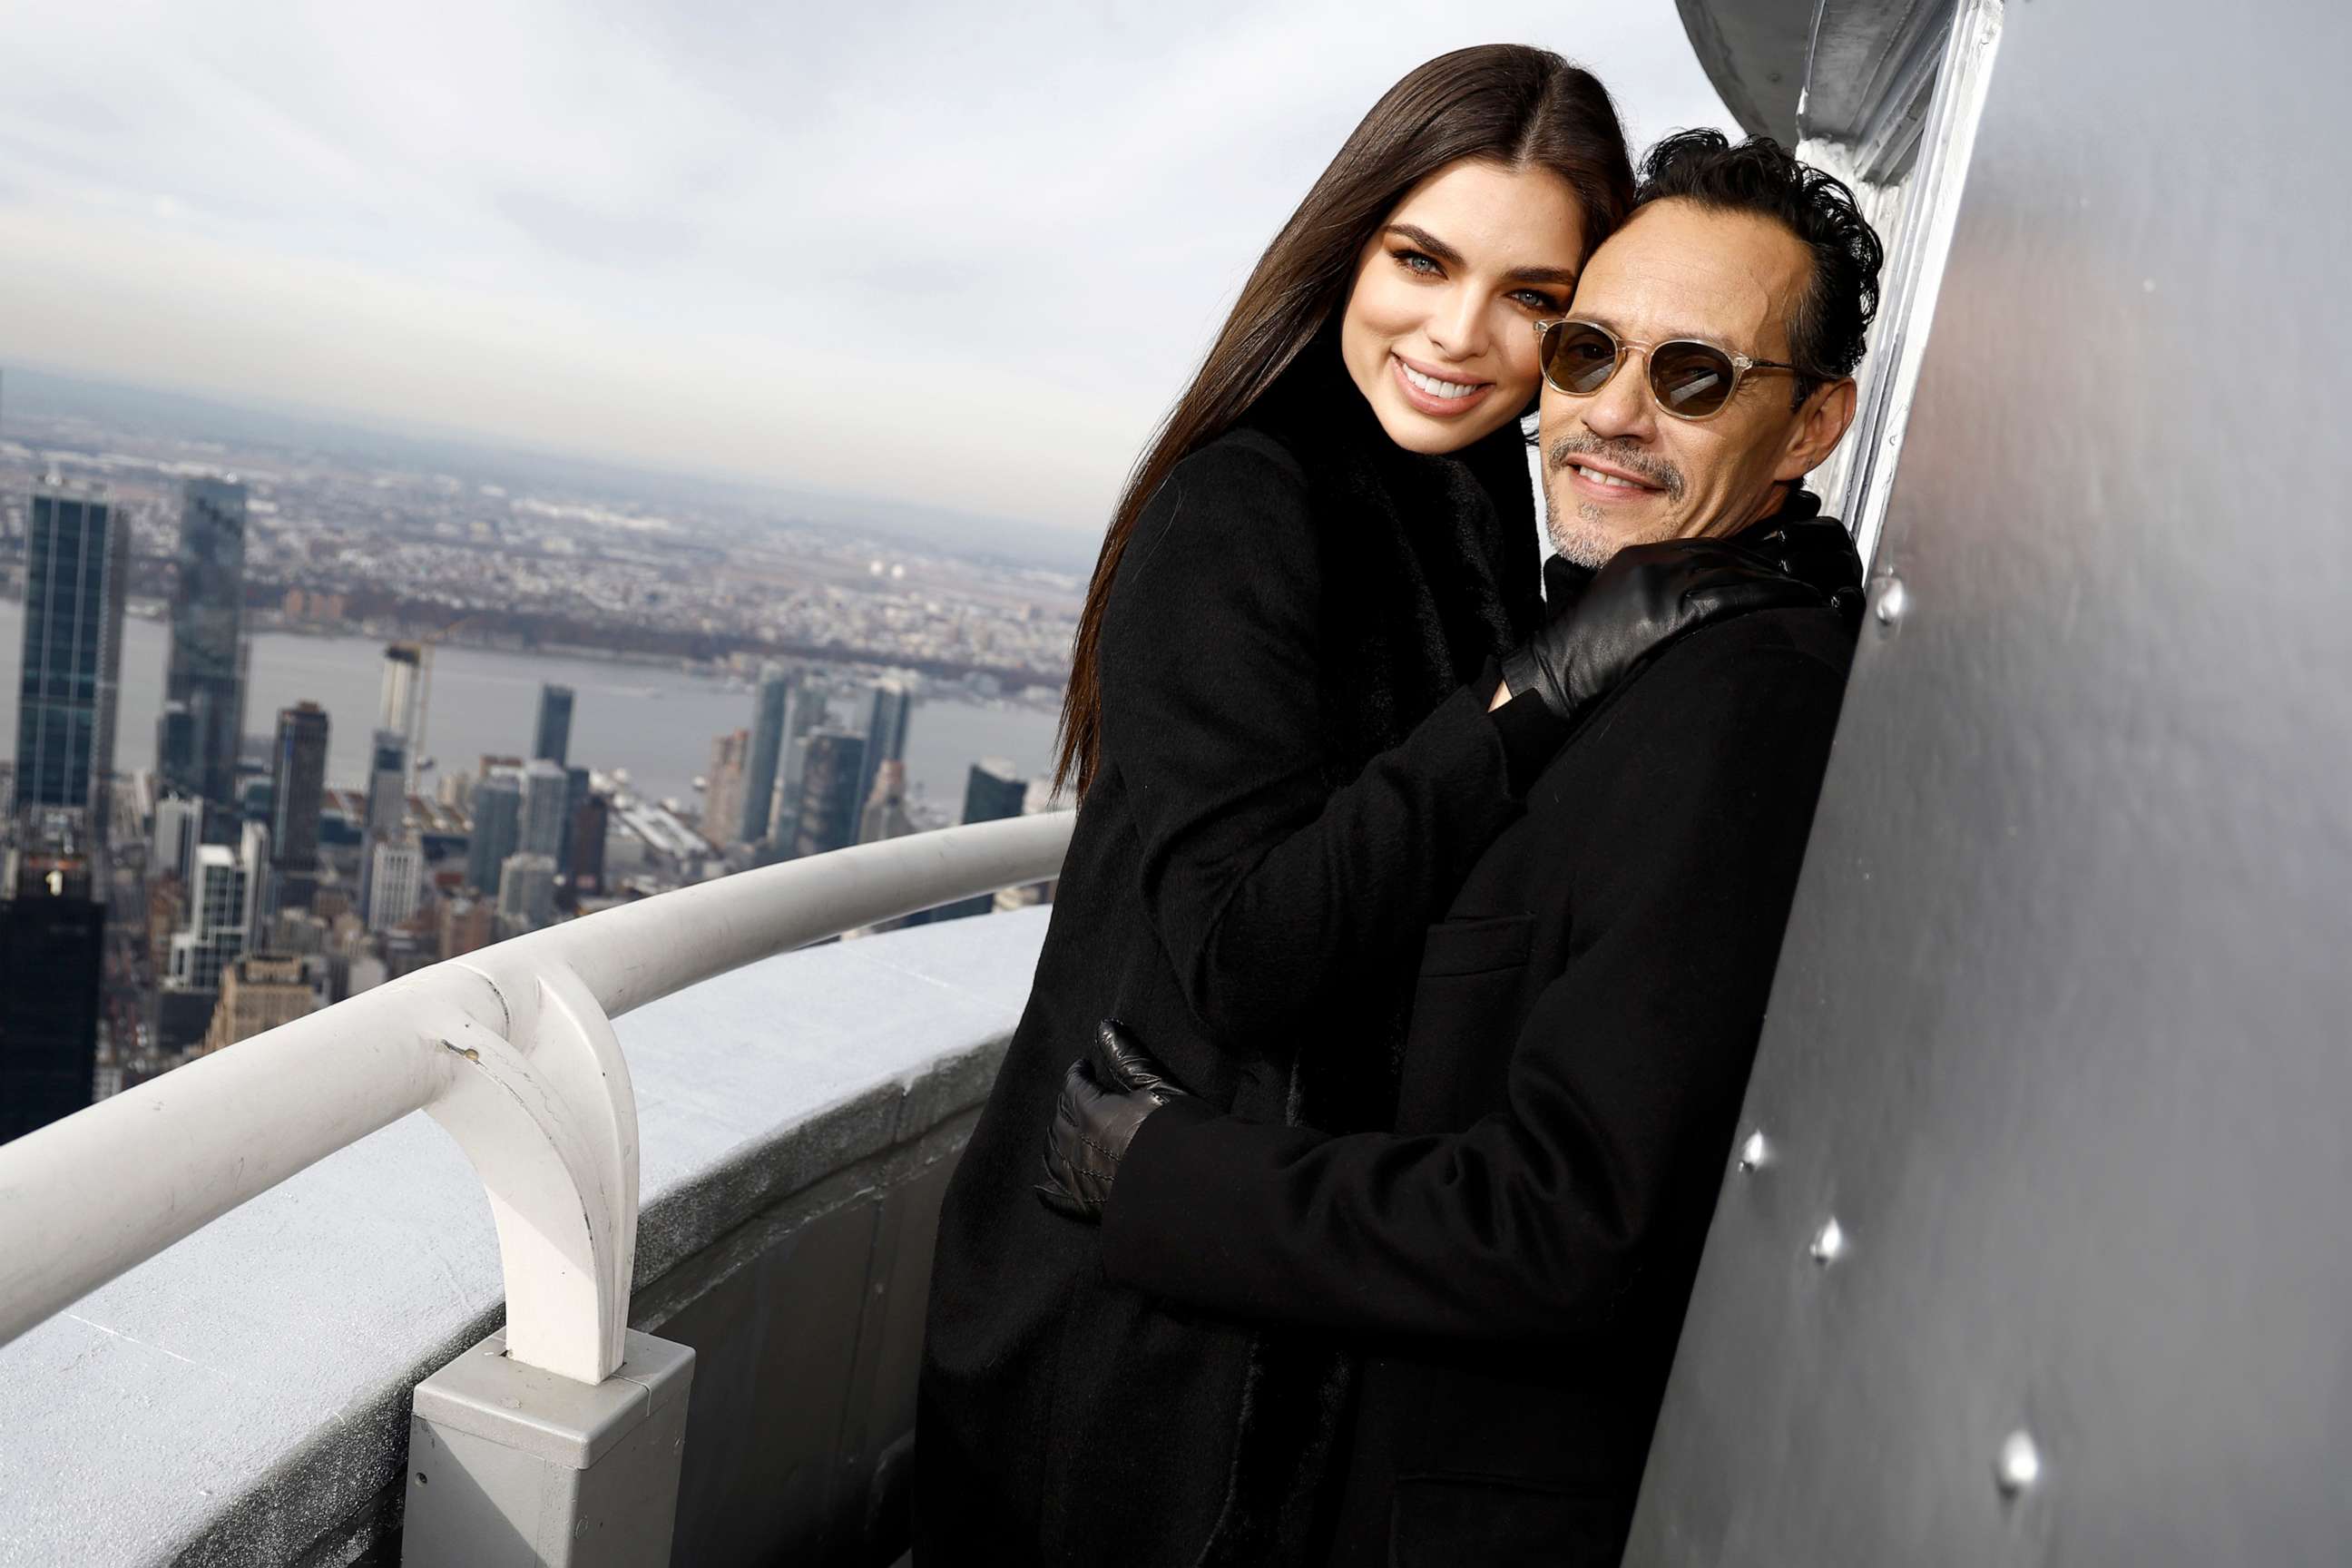 PHOTO: Nadia Ferreira and Marc Anthony visit the Empire State Building on Dec. 5, 2022 in New York City.